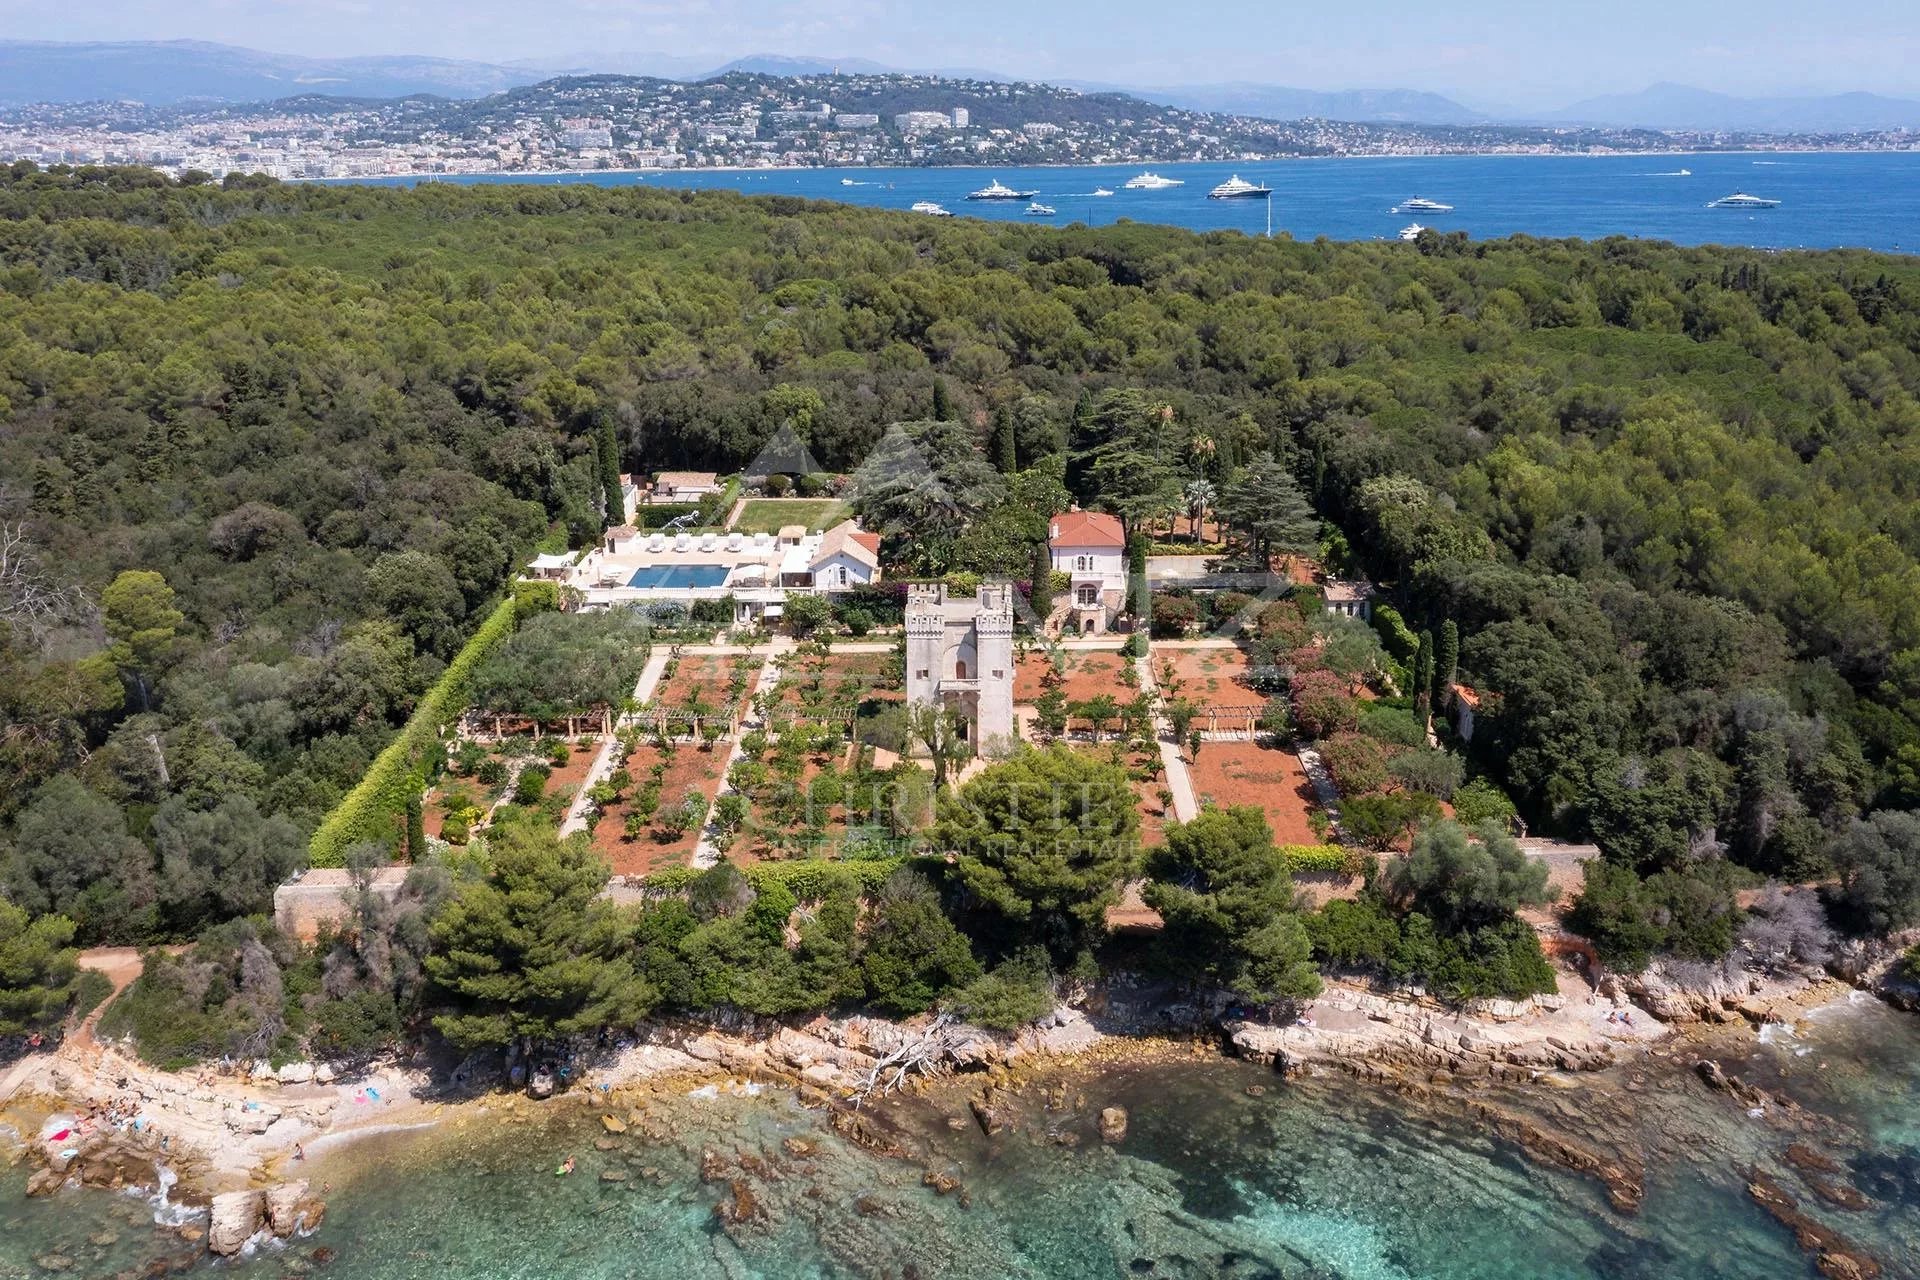 Cannes - Lérins Islands - Private domain